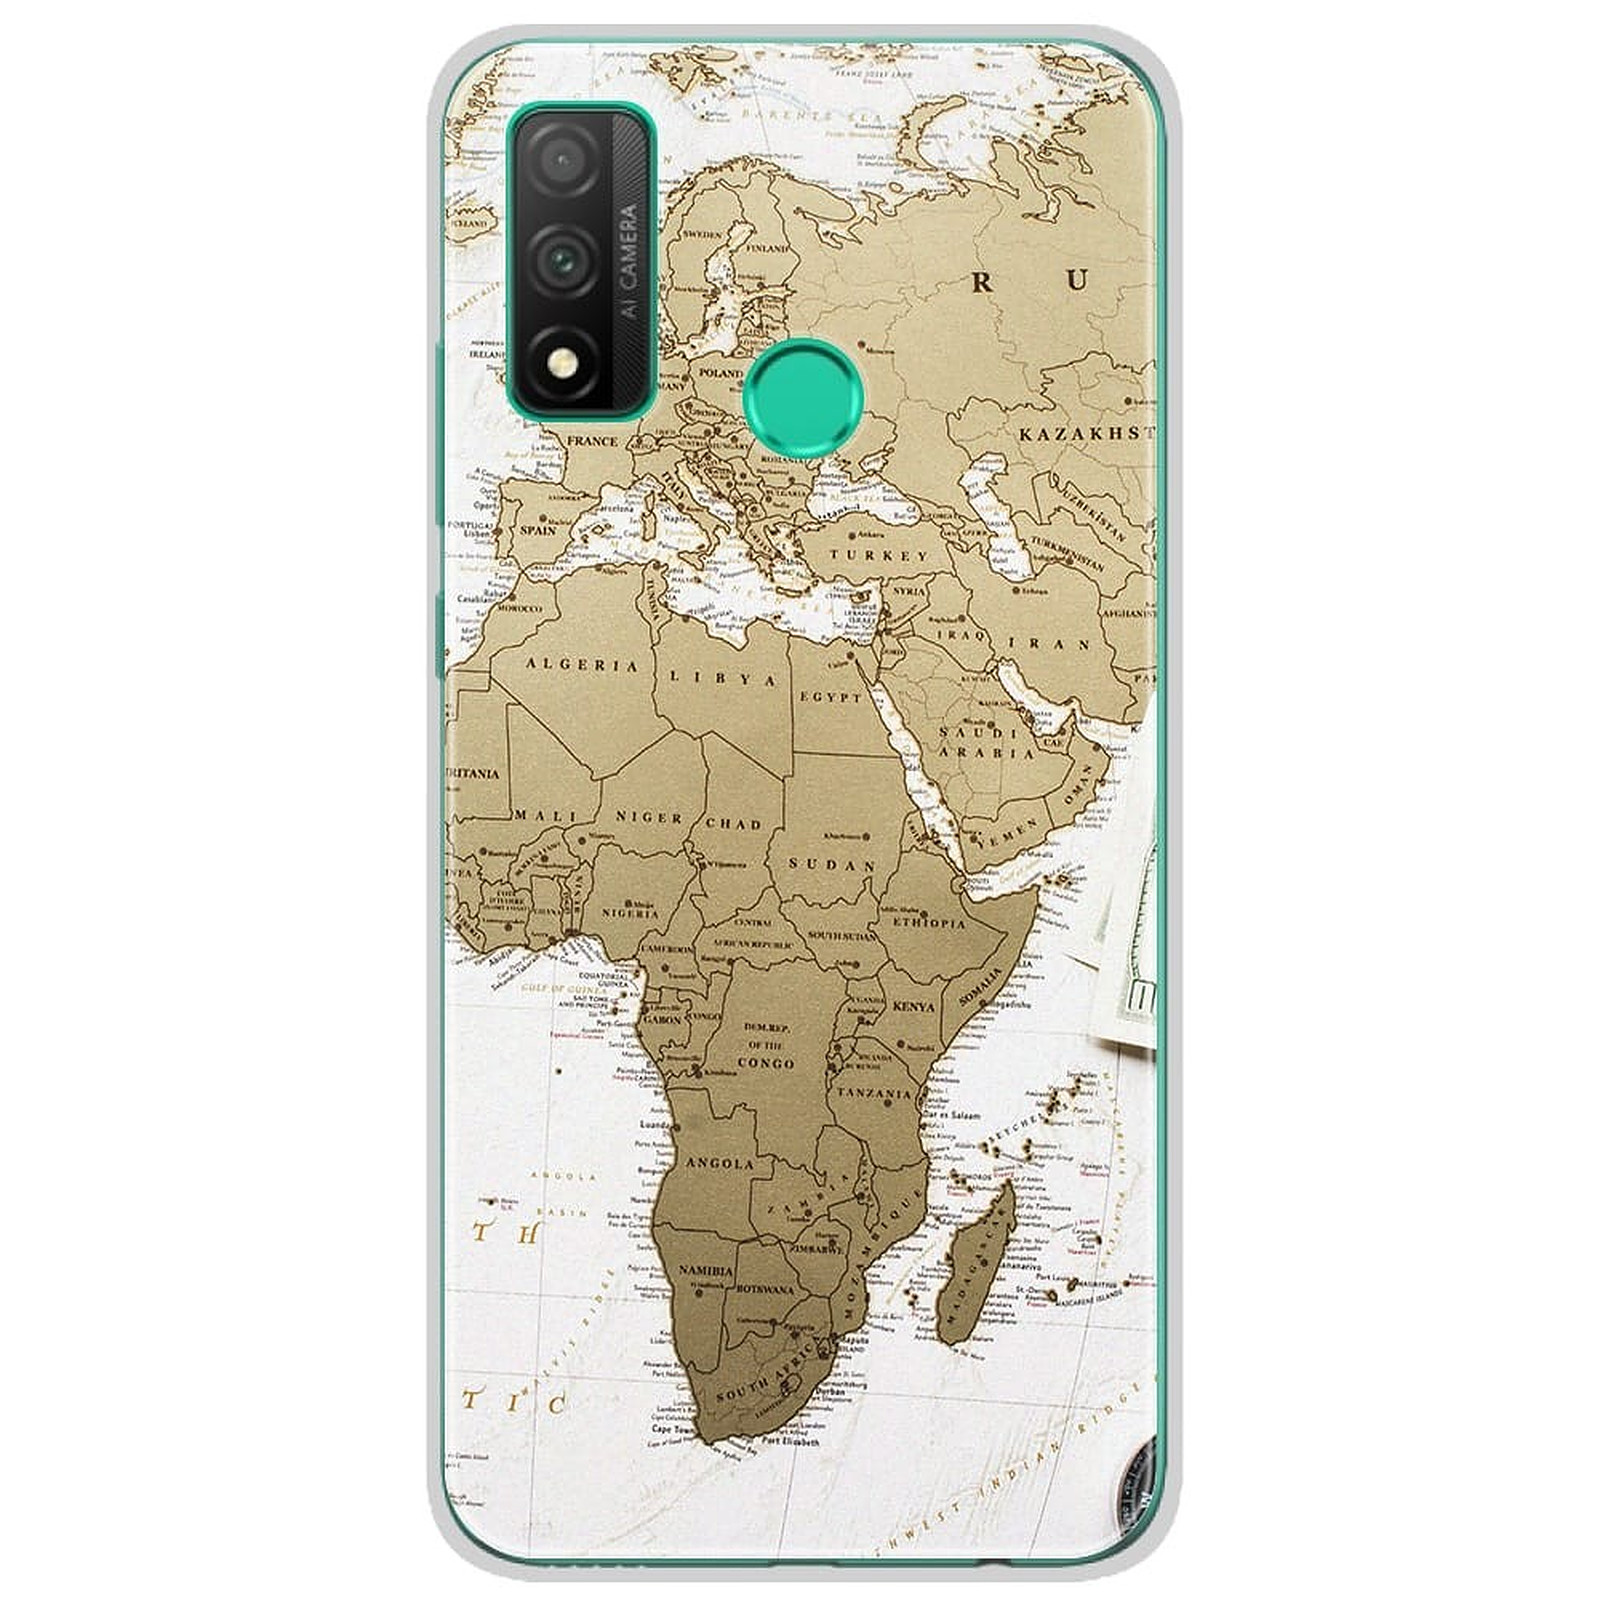 1001 Coques Coque silicone gel Huawei P Smart 2020 motif Map Europe Afrique - Coque telephone 1001Coques